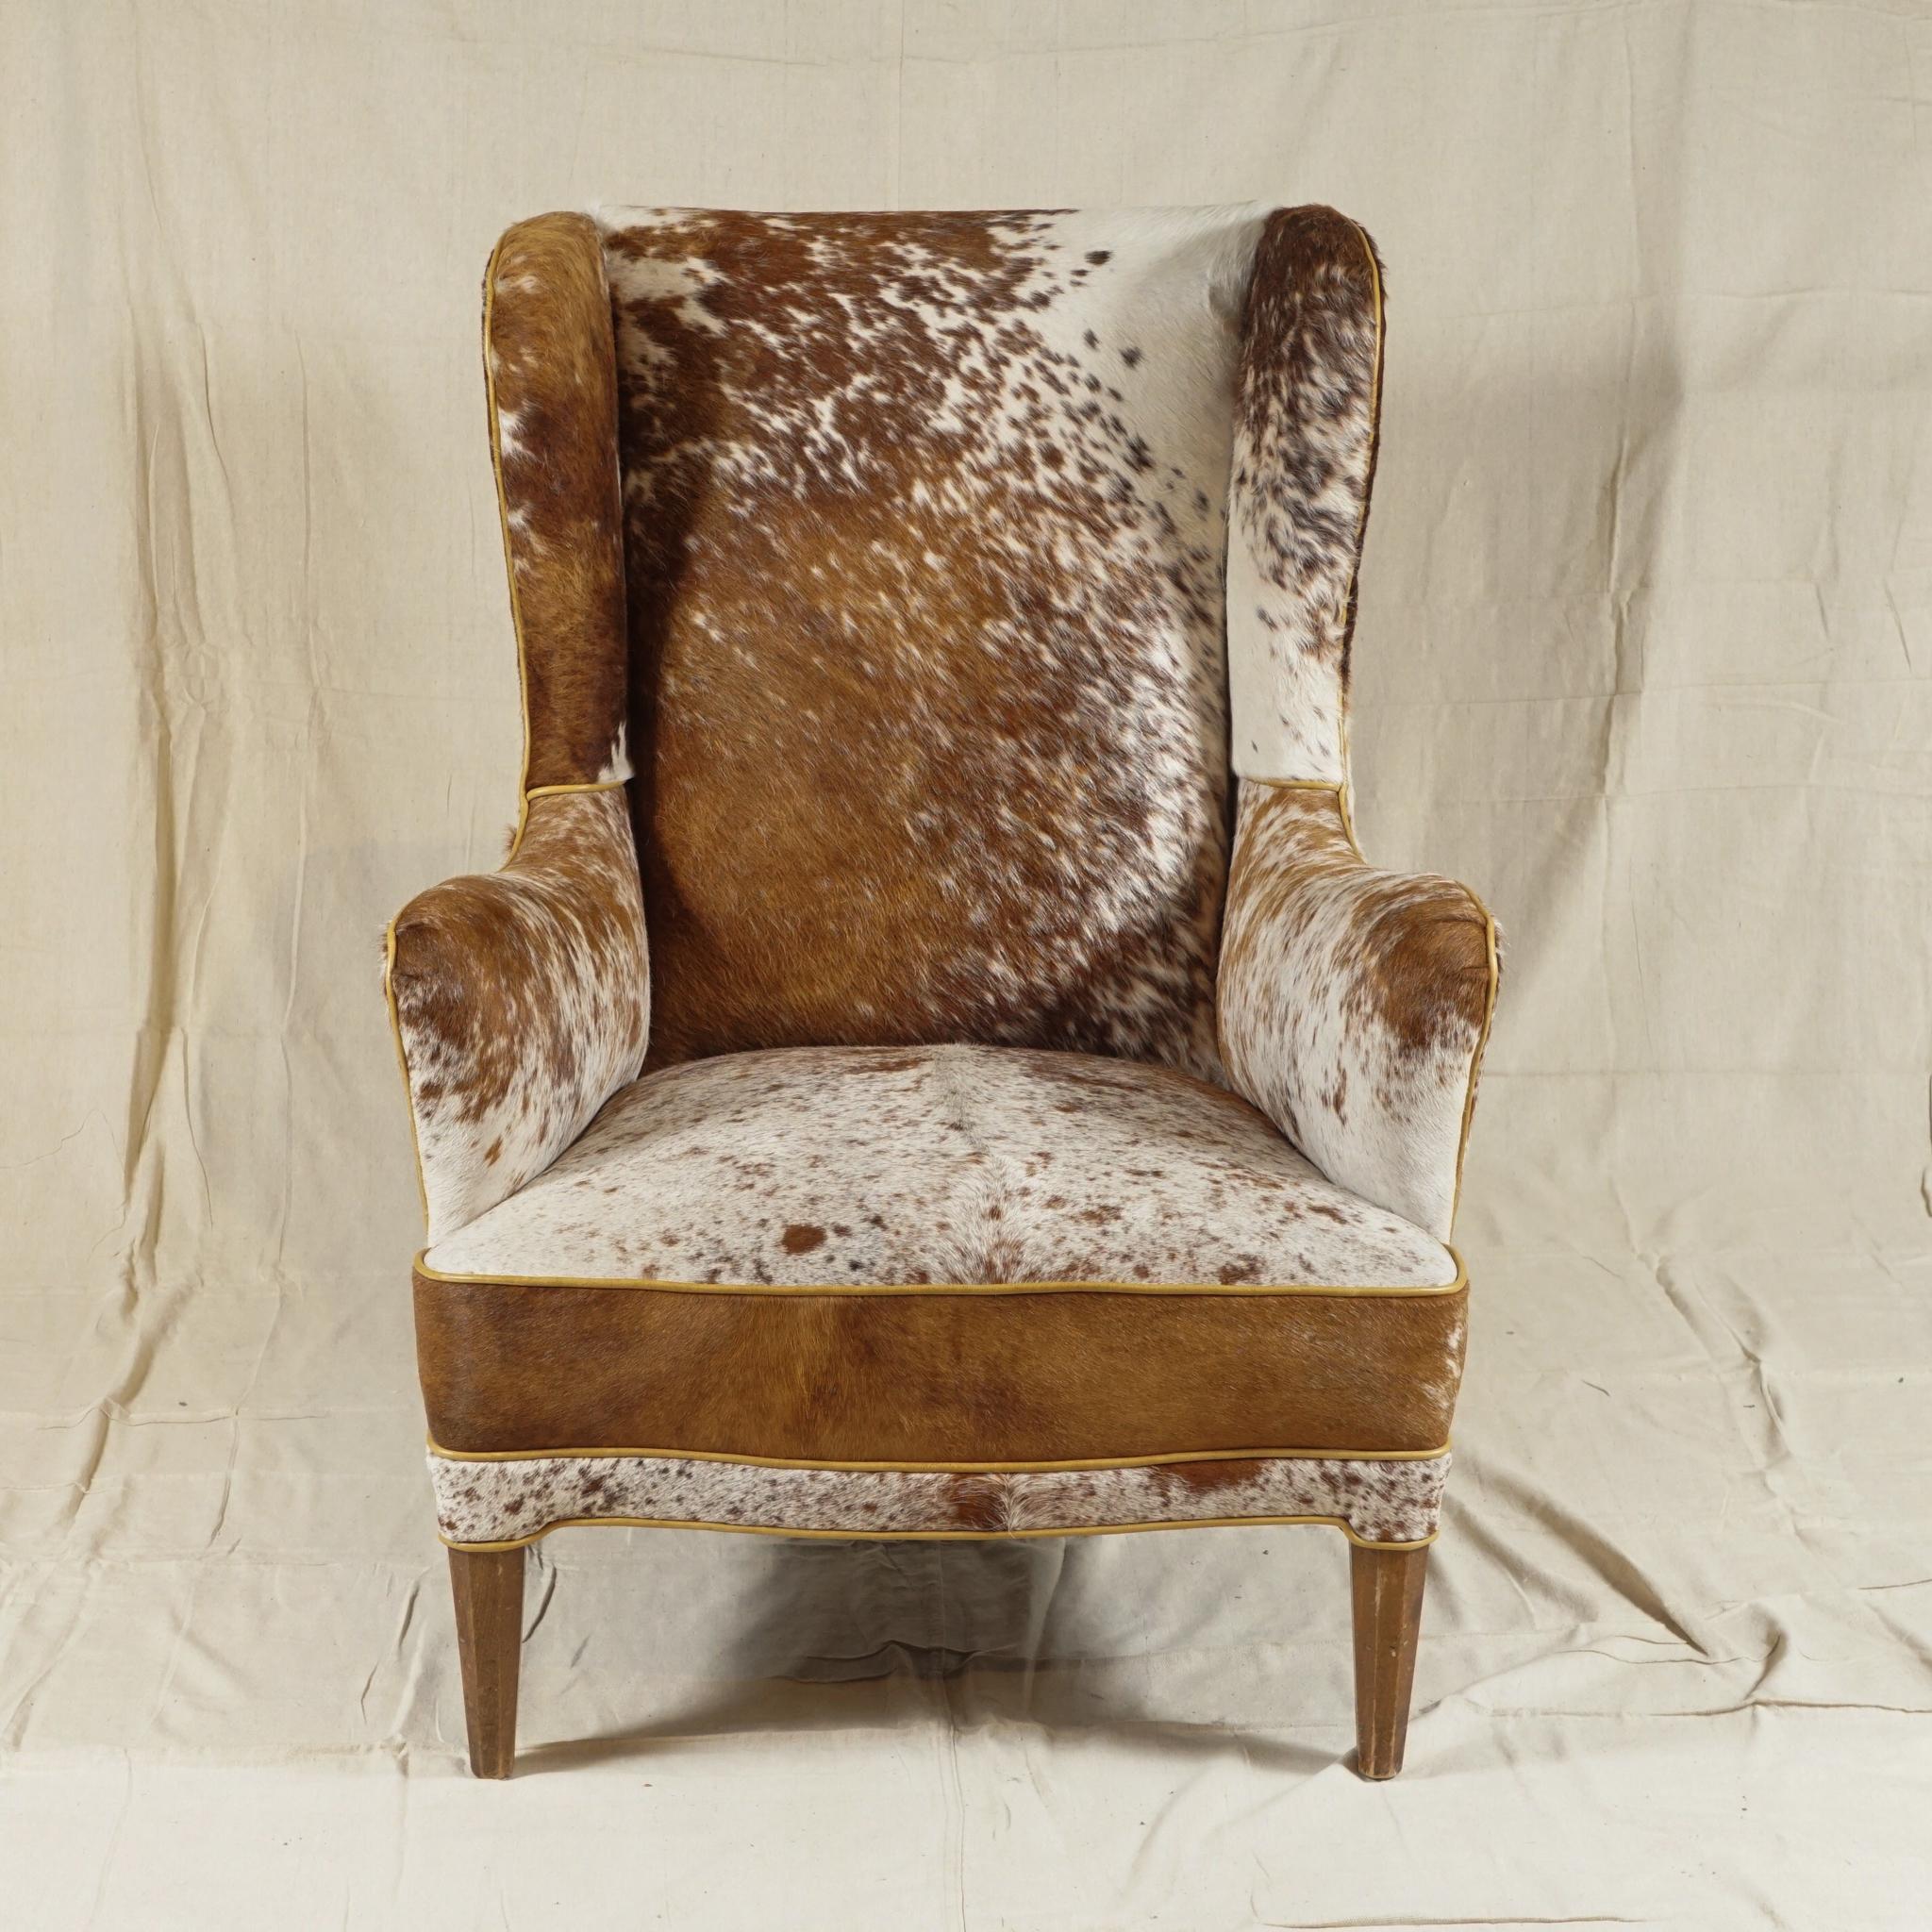 A wingback armchair by Danish designer Frits Henningsen, recovered in soft cowhide, extremely
comfortable. A pair available.

Frits Henningsen (1889-1965) was a Danish furniture designer and cabinet maker who achieved high standards of quality